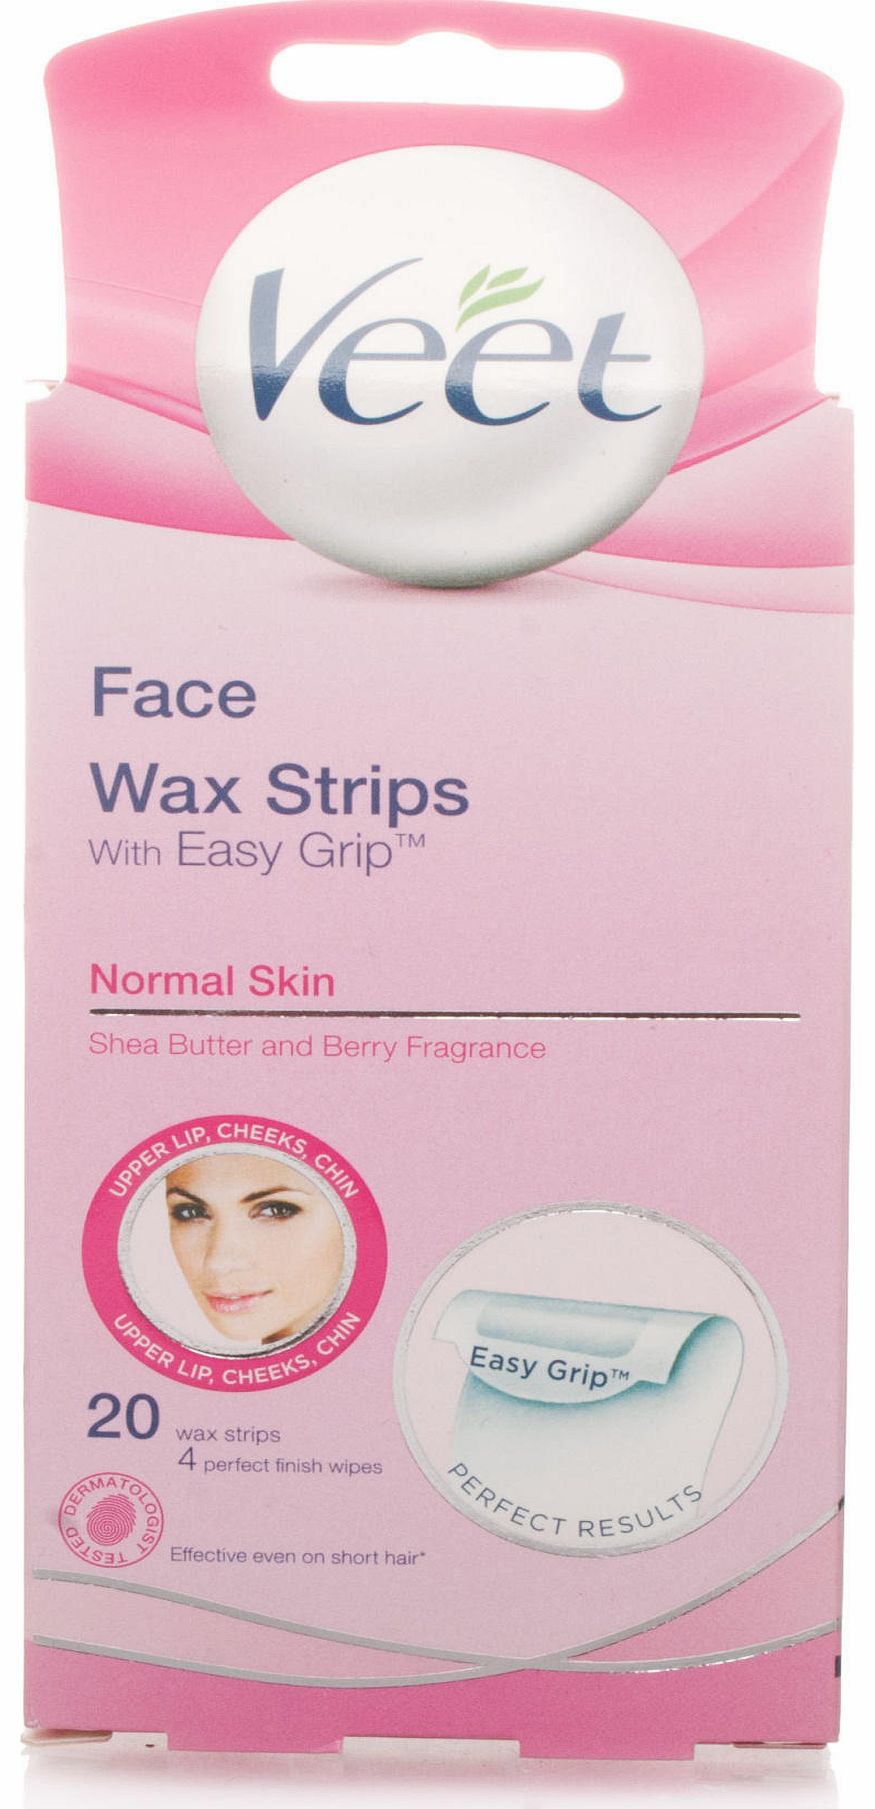 Veet Ready to Use Wax Strips for Face for Normal